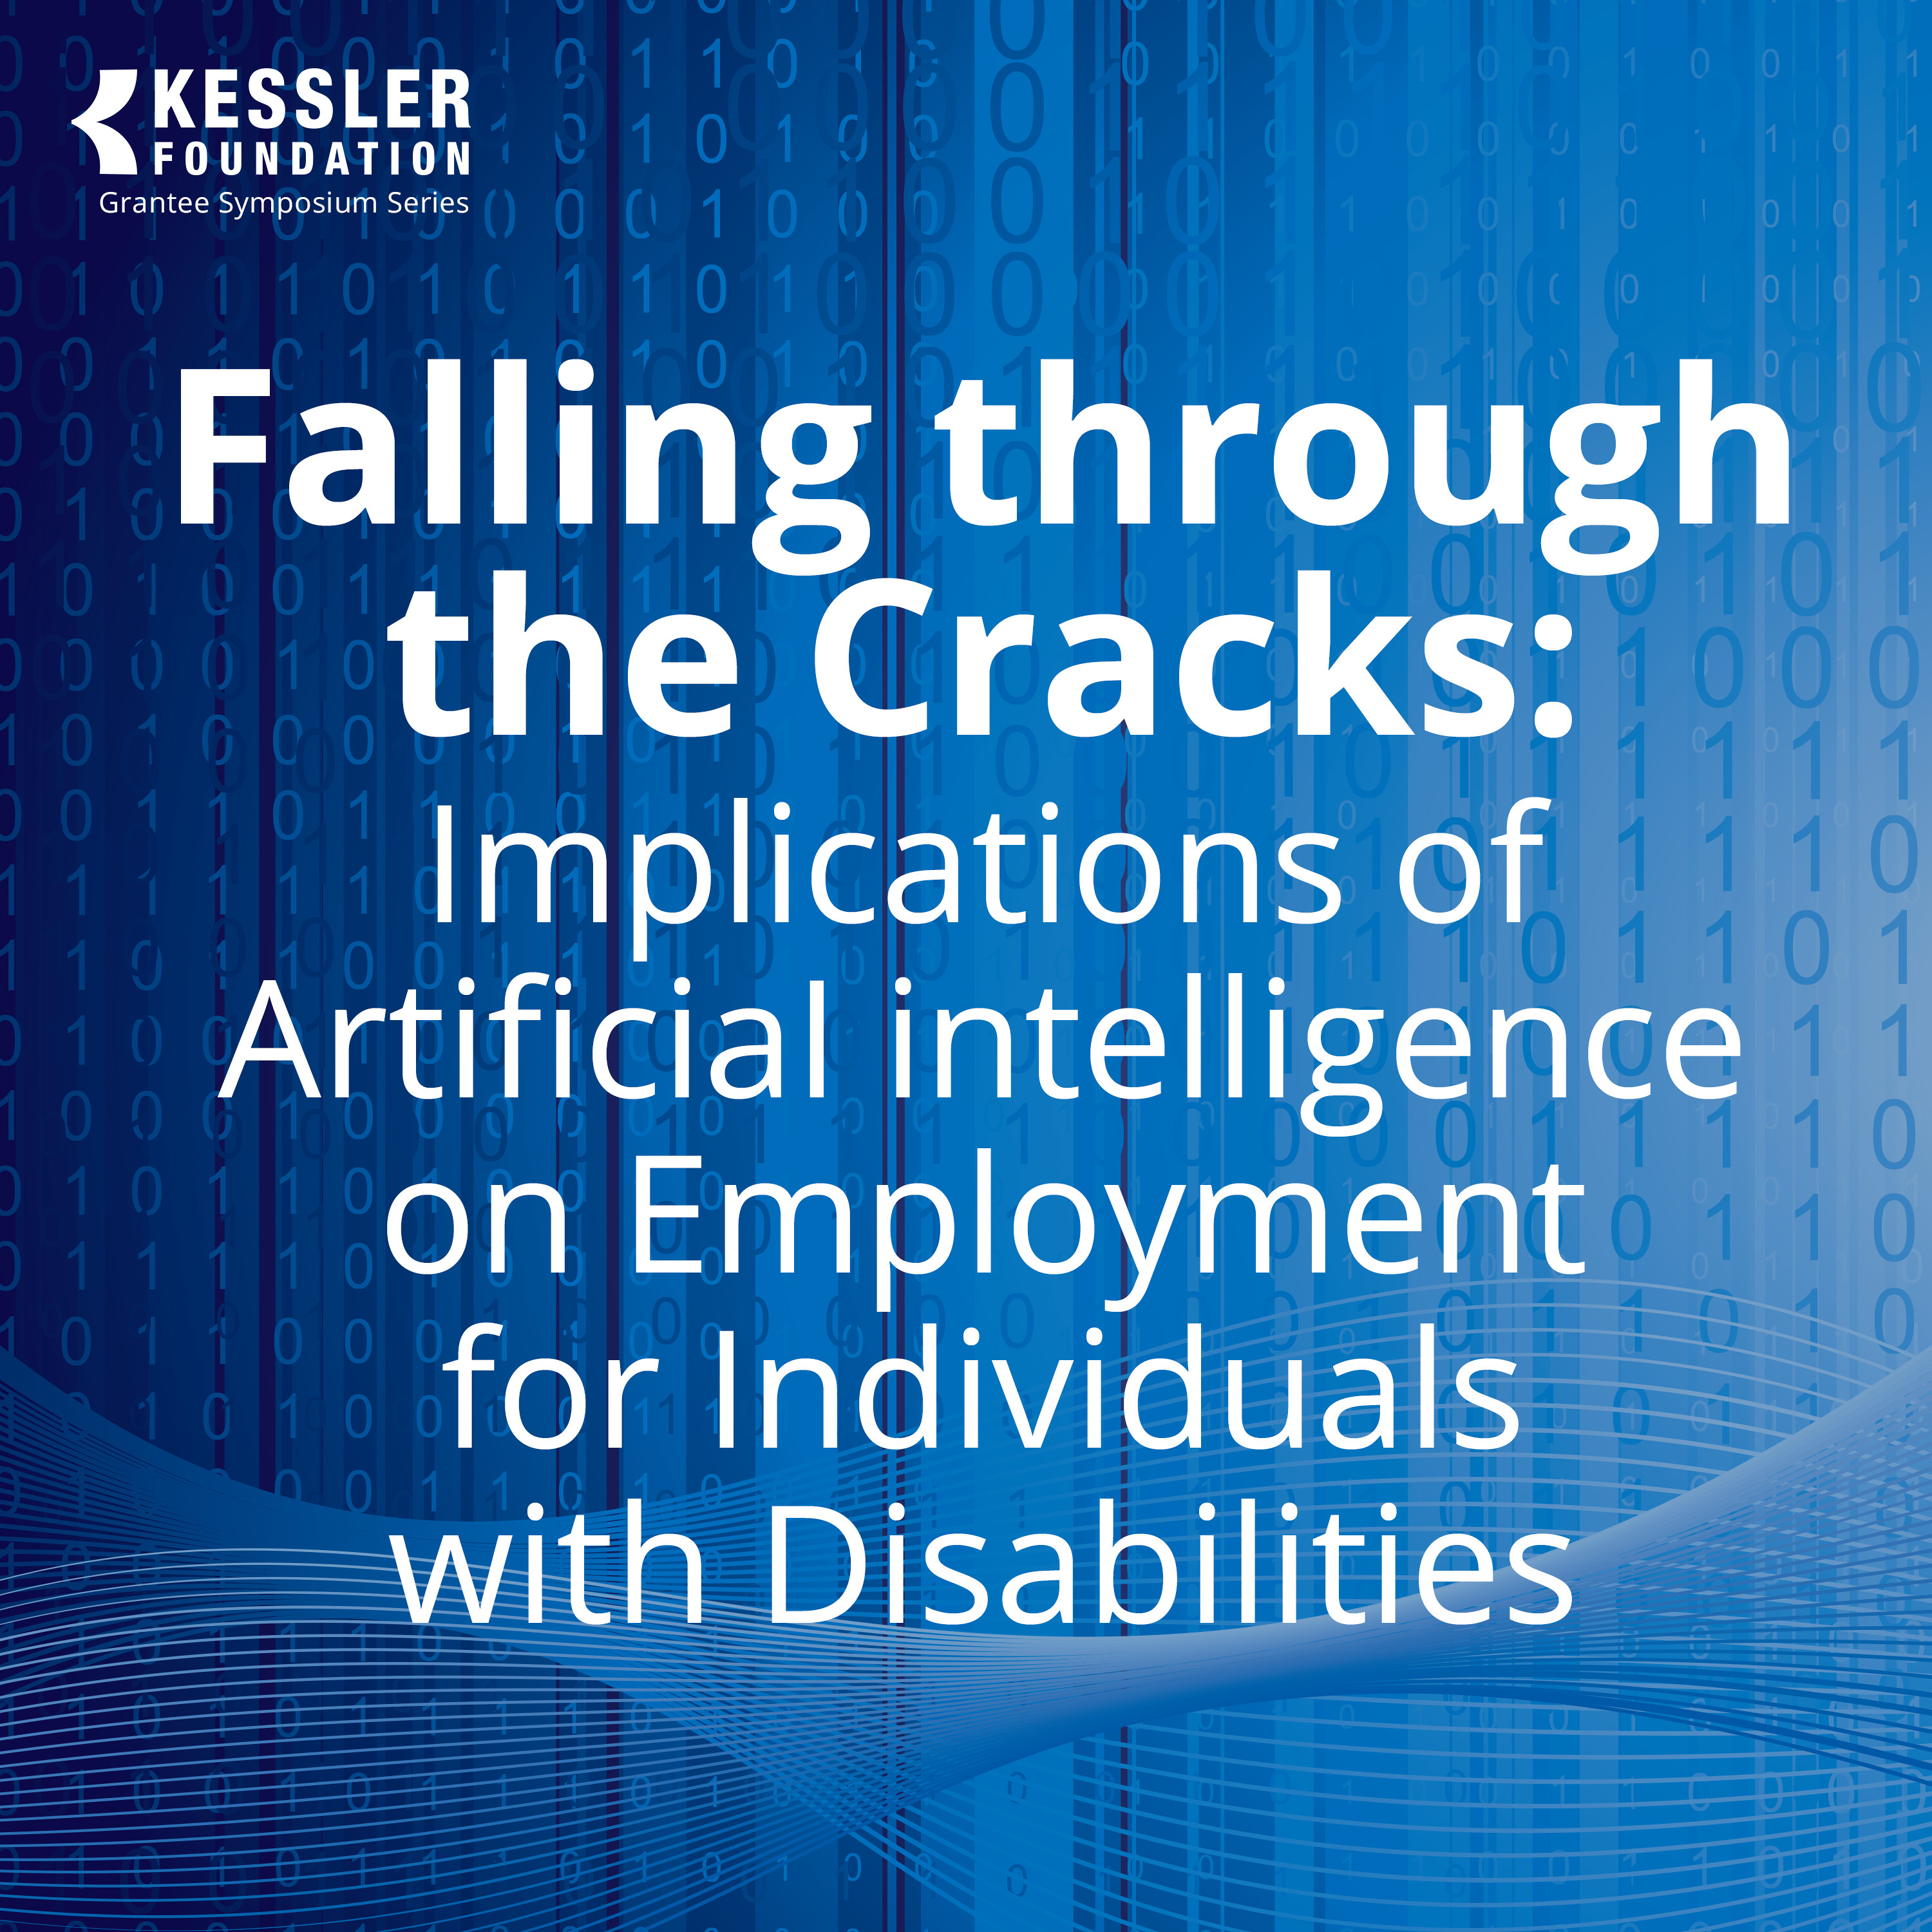 Implications of Artificial Intelligence on Employment for individuals with Disabilities